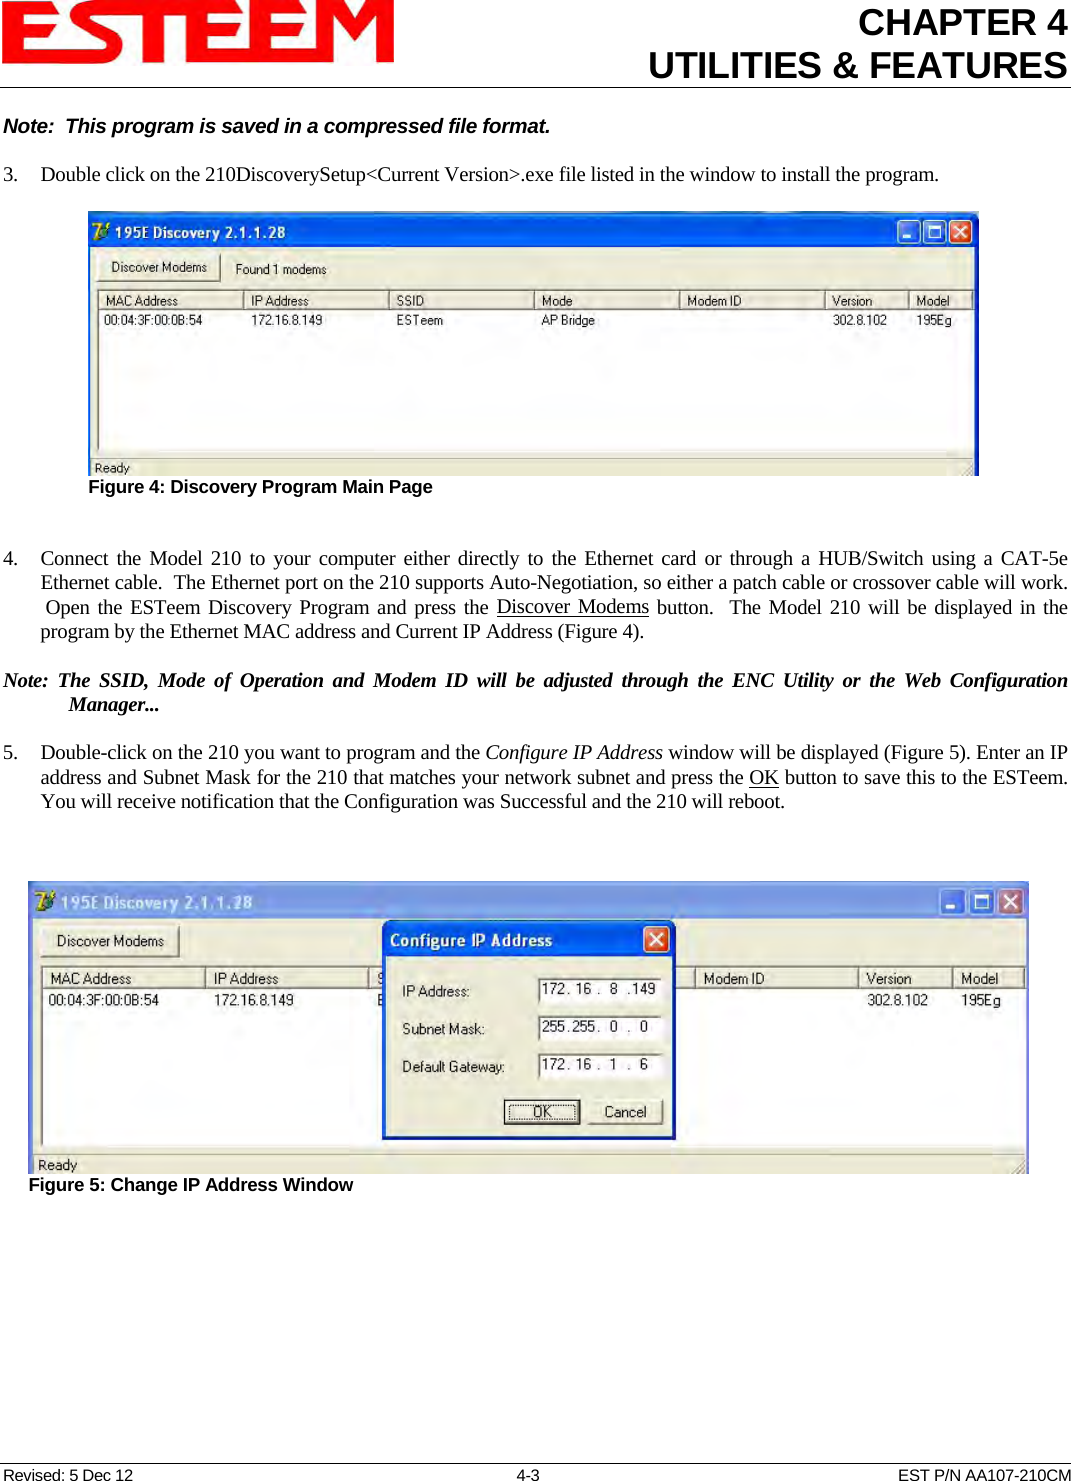 CHAPTER 4UTILITIES &amp; FEATURES  Note:  This program is saved in a compressed file format.  3. Double click on the 210DiscoverySetup&lt;Current Version&gt;.exe file listed in the window to install the program.  Figure 4: Discovery Program Main Page  4. Connect the Model 210 to your computer either directly to the Ethernet card or through a HUB/Switch using a CAT-5e Ethernet cable.  The Ethernet port on the 210 supports Auto-Negotiation, so either a patch cable or crossover cable will work.  Open the ESTeem Discovery Program and press the Discover Modems button.  The Model 210 will be displayed in the program by the Ethernet MAC address and Current IP Address (Figure 4).    Note: The SSID, Mode of Operation and Modem ID will be adjusted through the ENC Utility or the Web Configuration Manager...     5. Double-click on the 210 you want to program and the Configure IP Address window will be displayed (Figure 5). Enter an IP address and Subnet Mask for the 210 that matches your network subnet and press the OK button to save this to the ESTeem.  You will receive notification that the Configuration was Successful and the 210 will reboot.   Figure 5: Change IP Address Window  Revised: 5 Dec 12  4-3  EST P/N AA107-210CM 